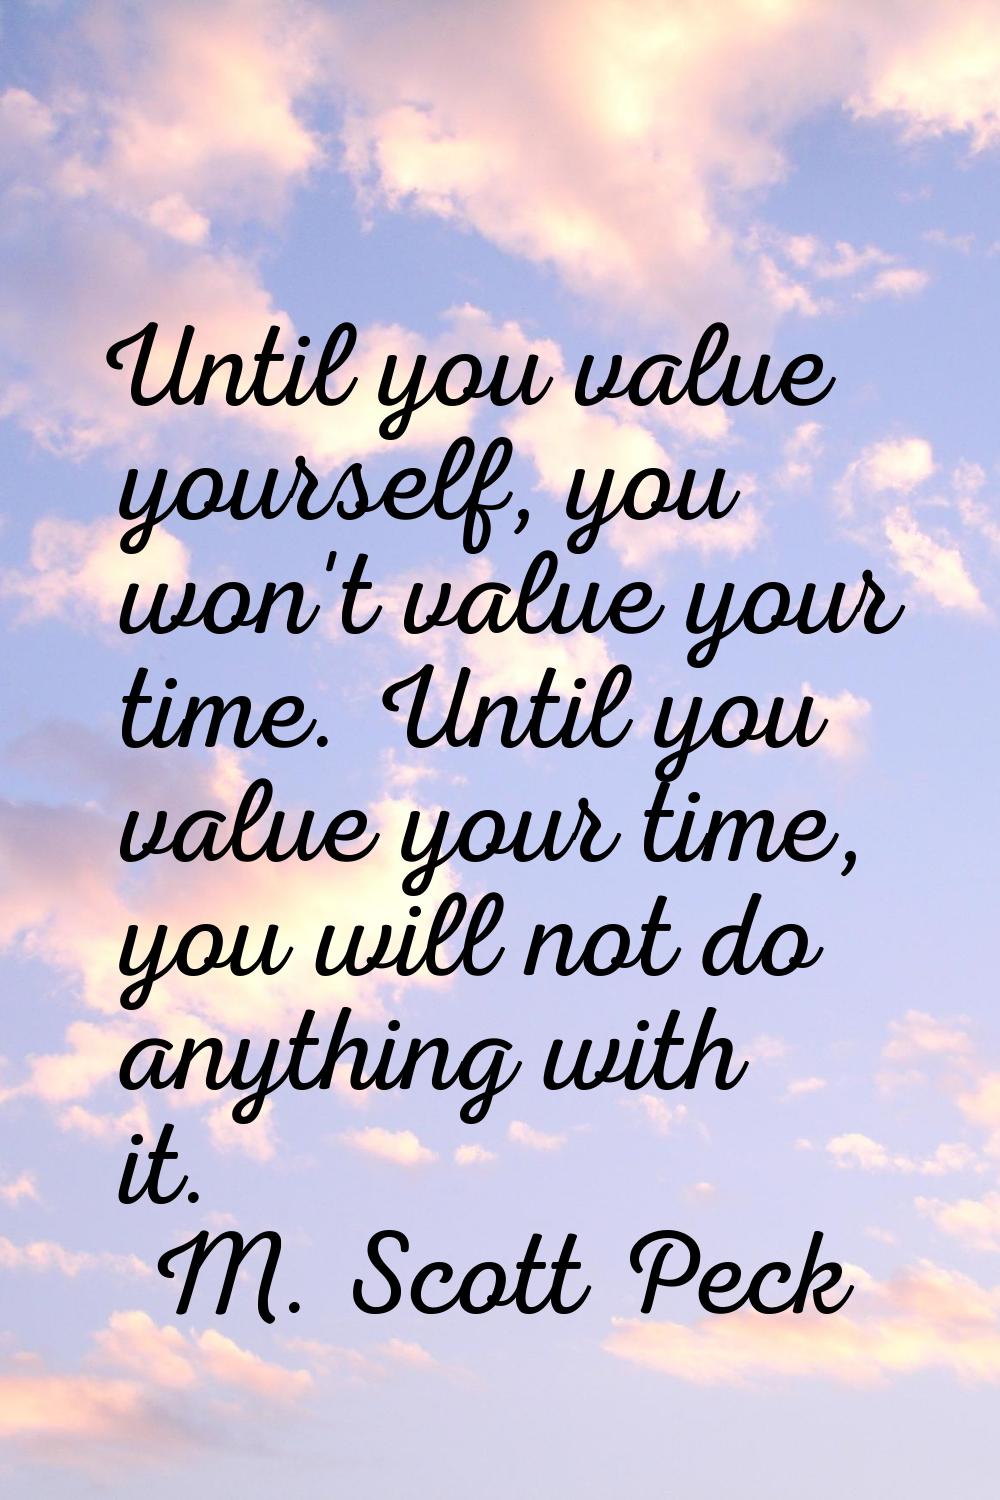 Until you value yourself, you won't value your time. Until you value your time, you will not do any